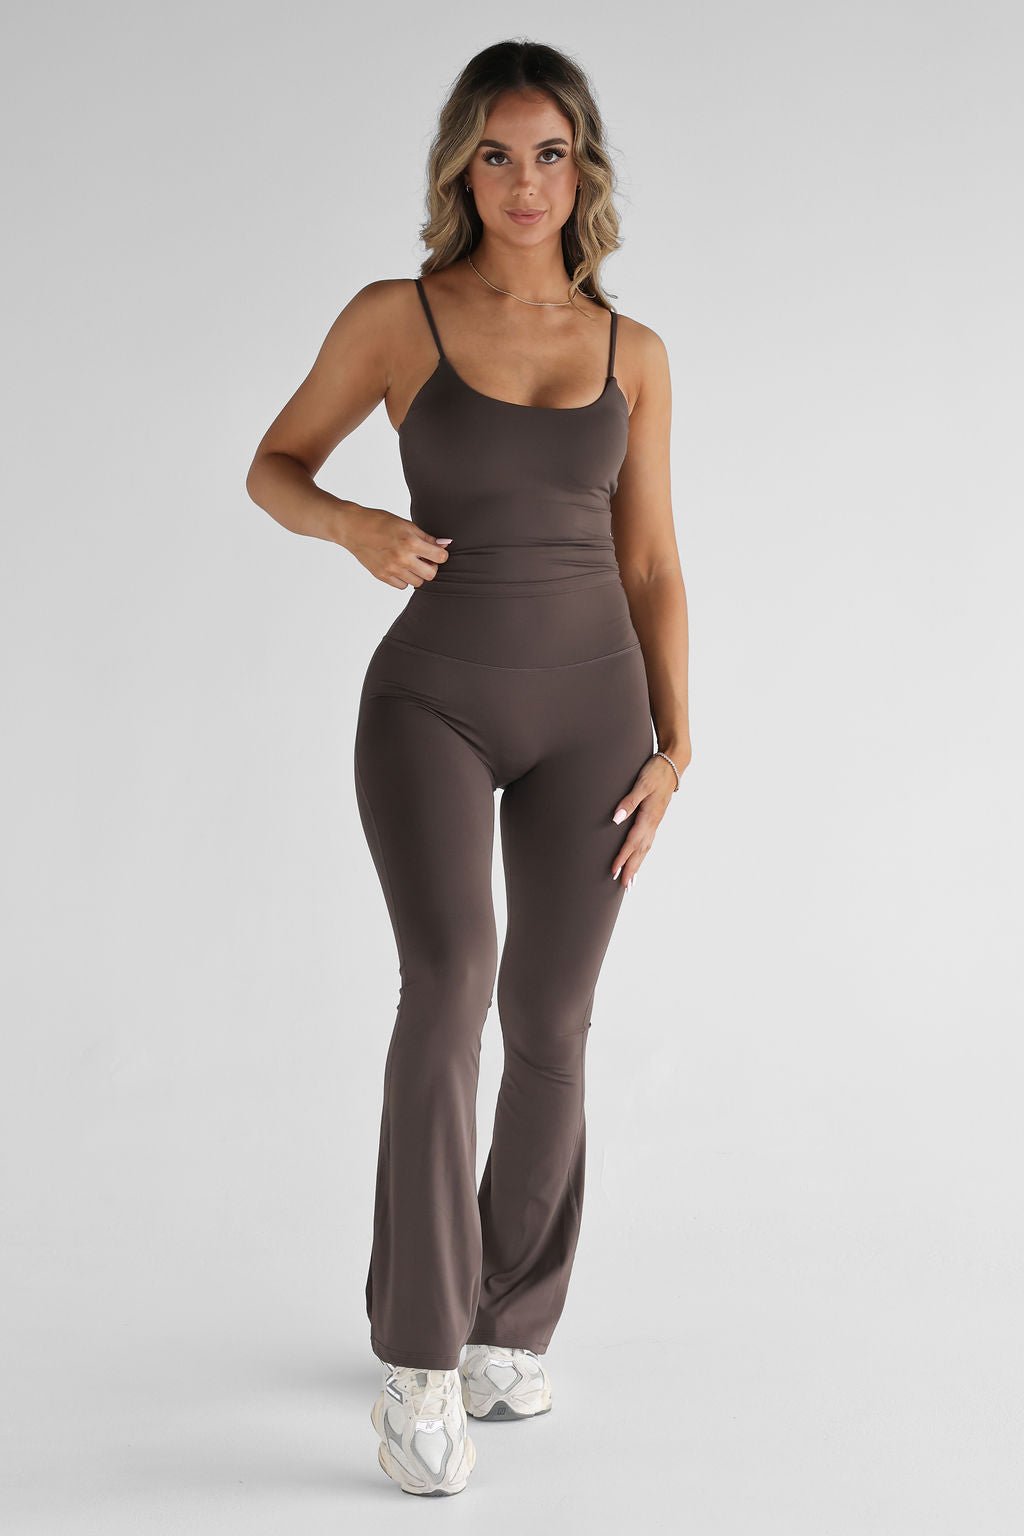 SCULPT Flare Leggings - Dark Chocolate SHIPPING FROM 23/08 - 25/08 - LEELO ACTIVE